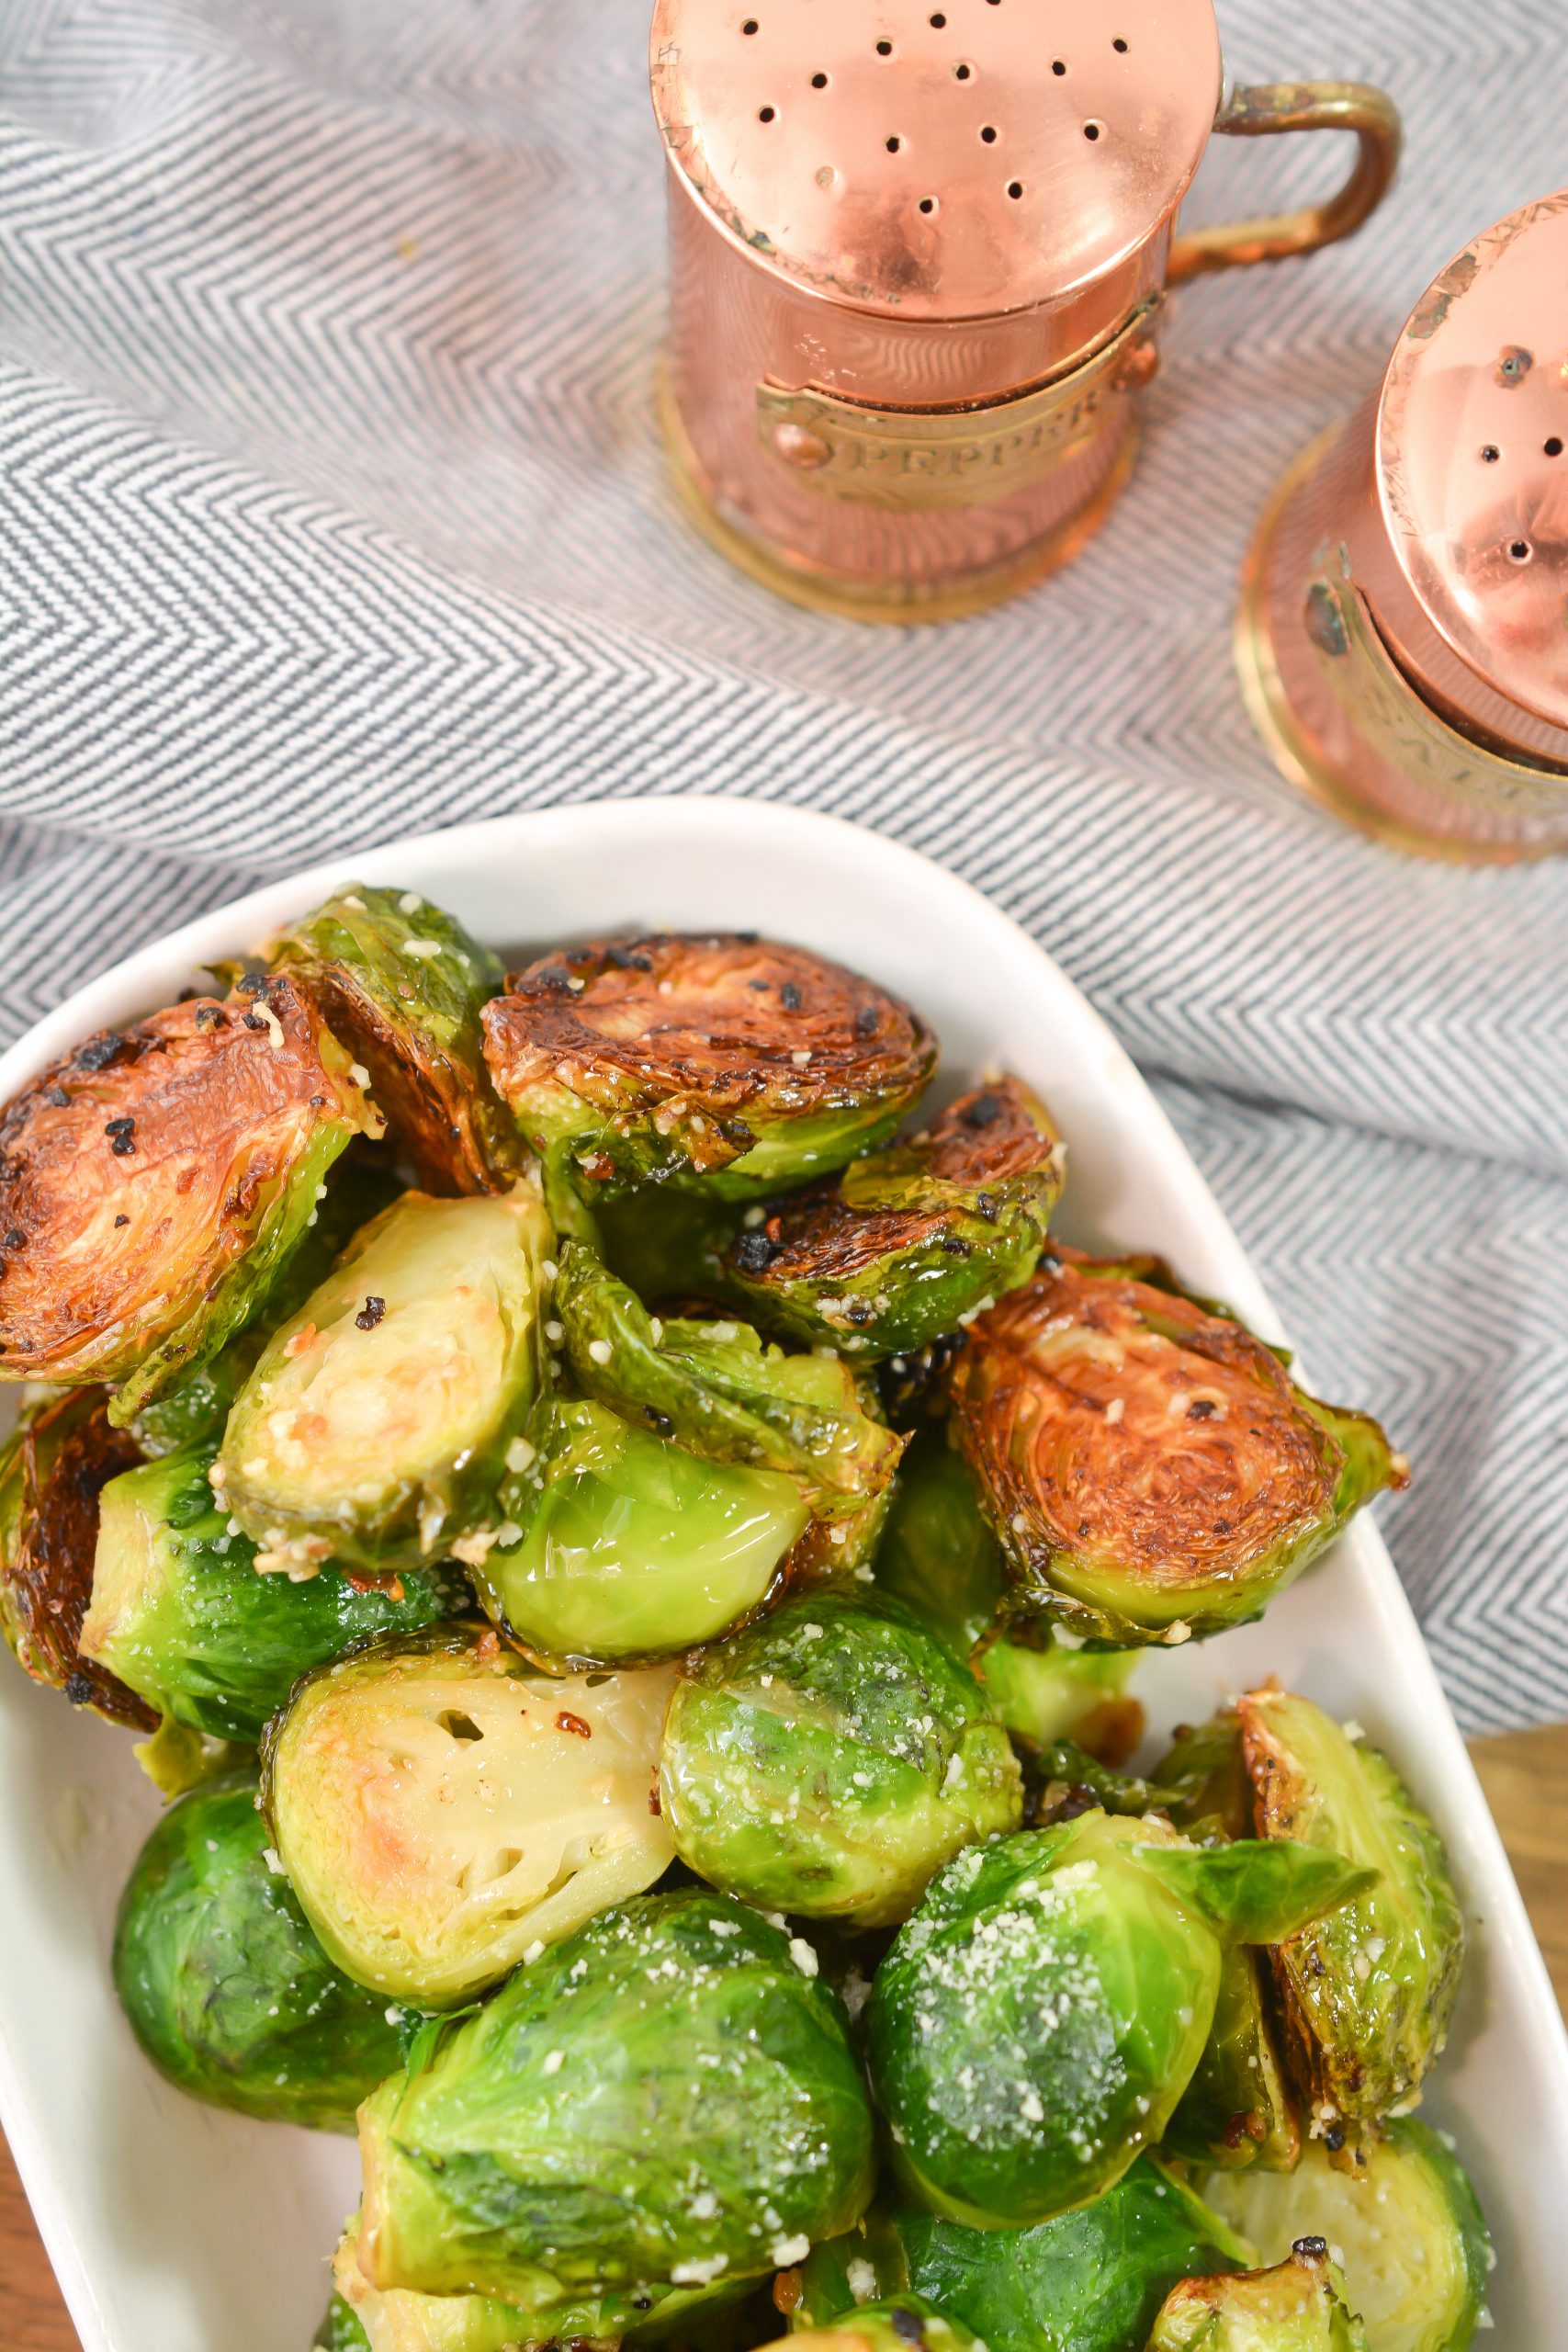 Brussels Sprouts in Garlic Butter